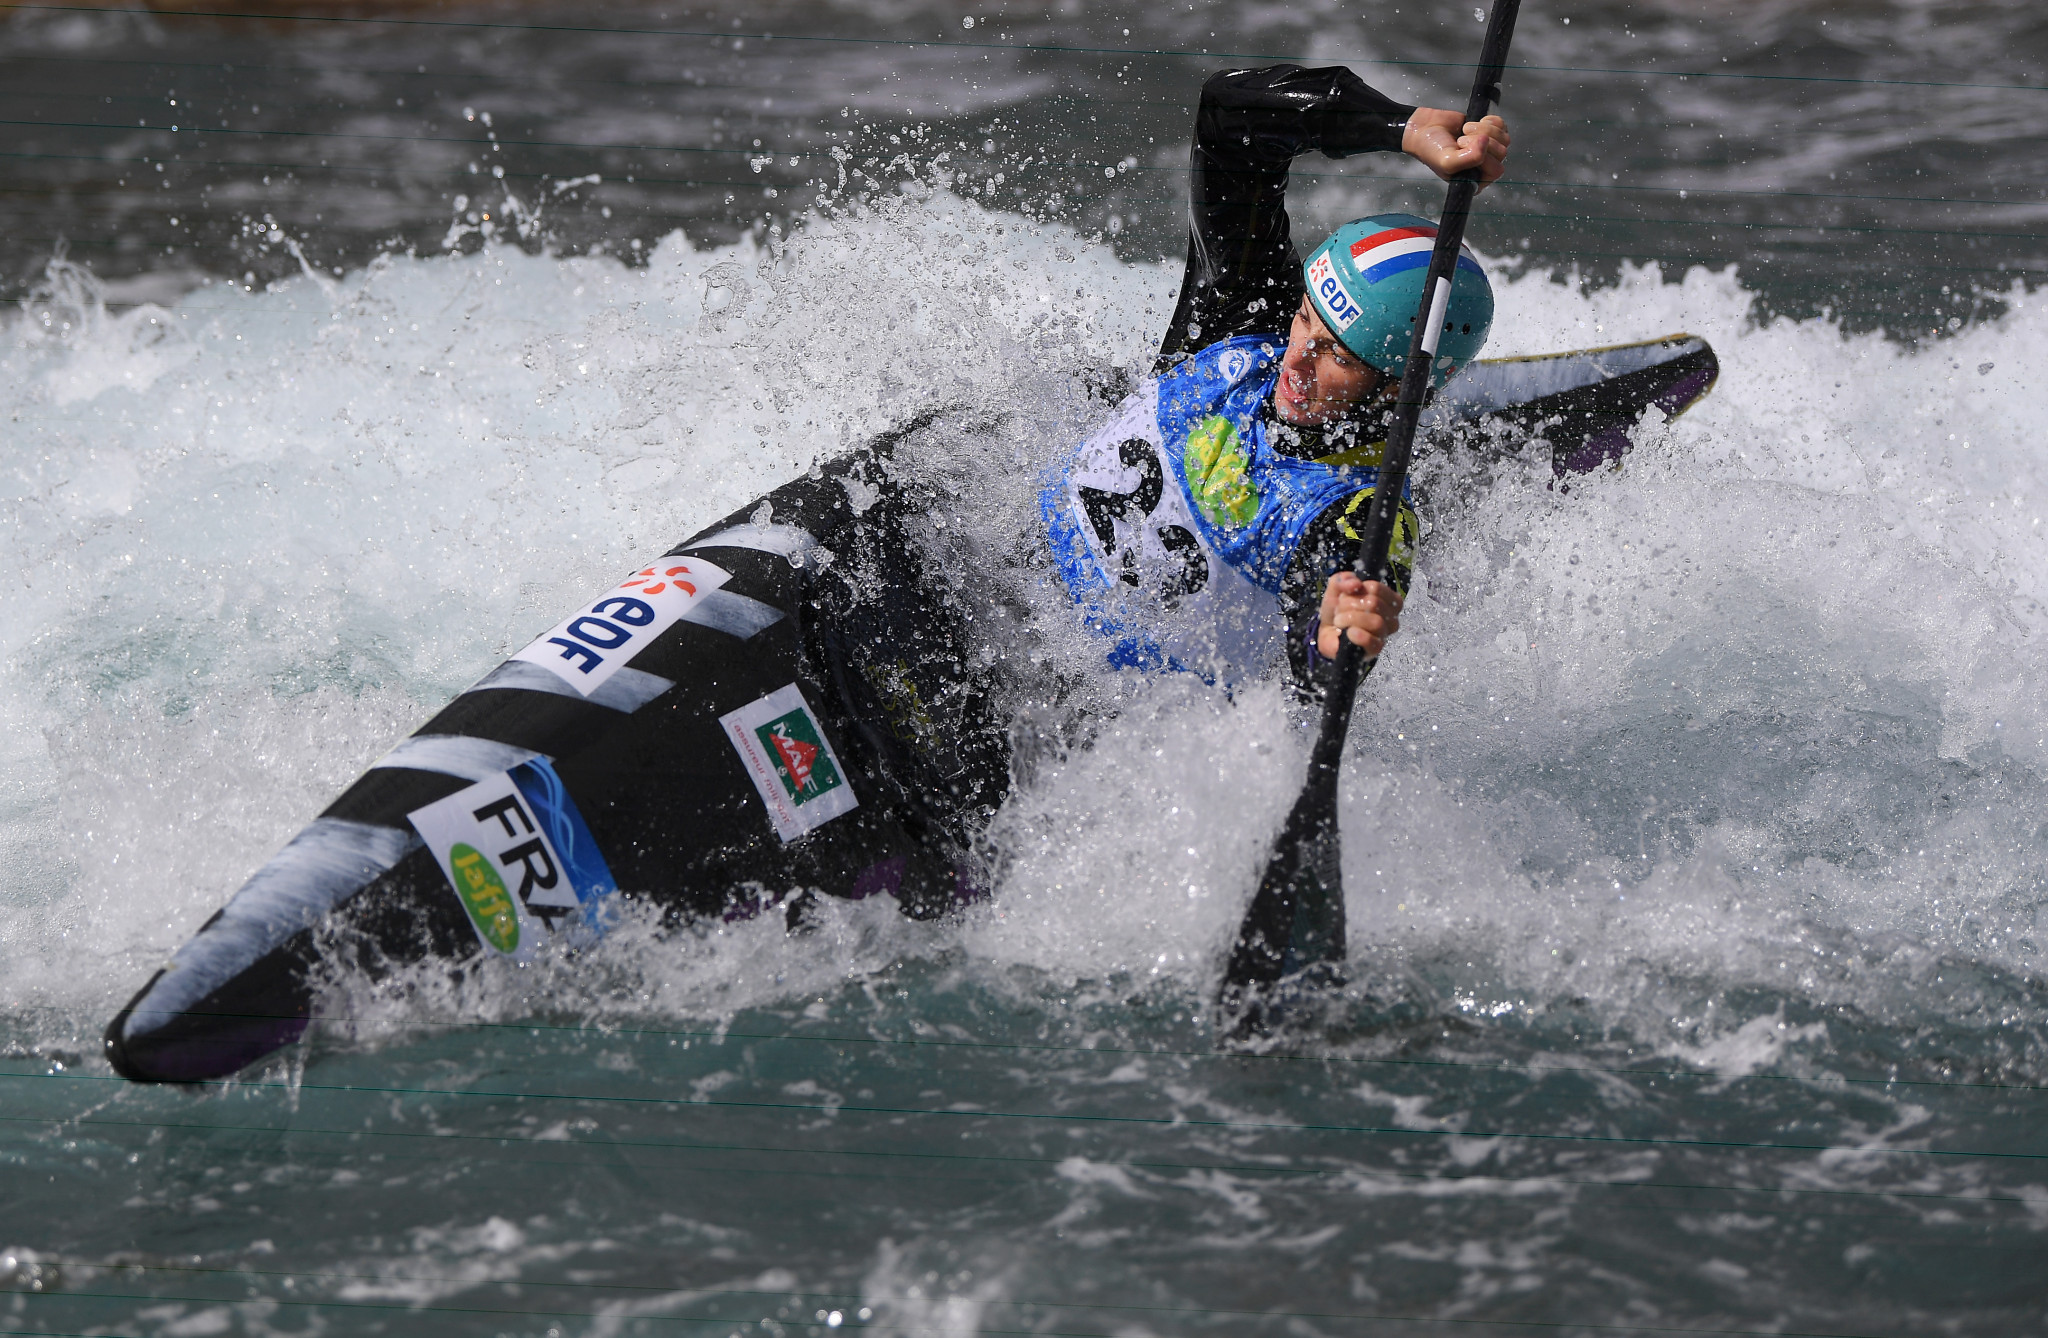 Marie-Zélia Lafont of France won the women's K1 heat at the ICF Canoe Slalom World Cup in Pau ©Getty Images